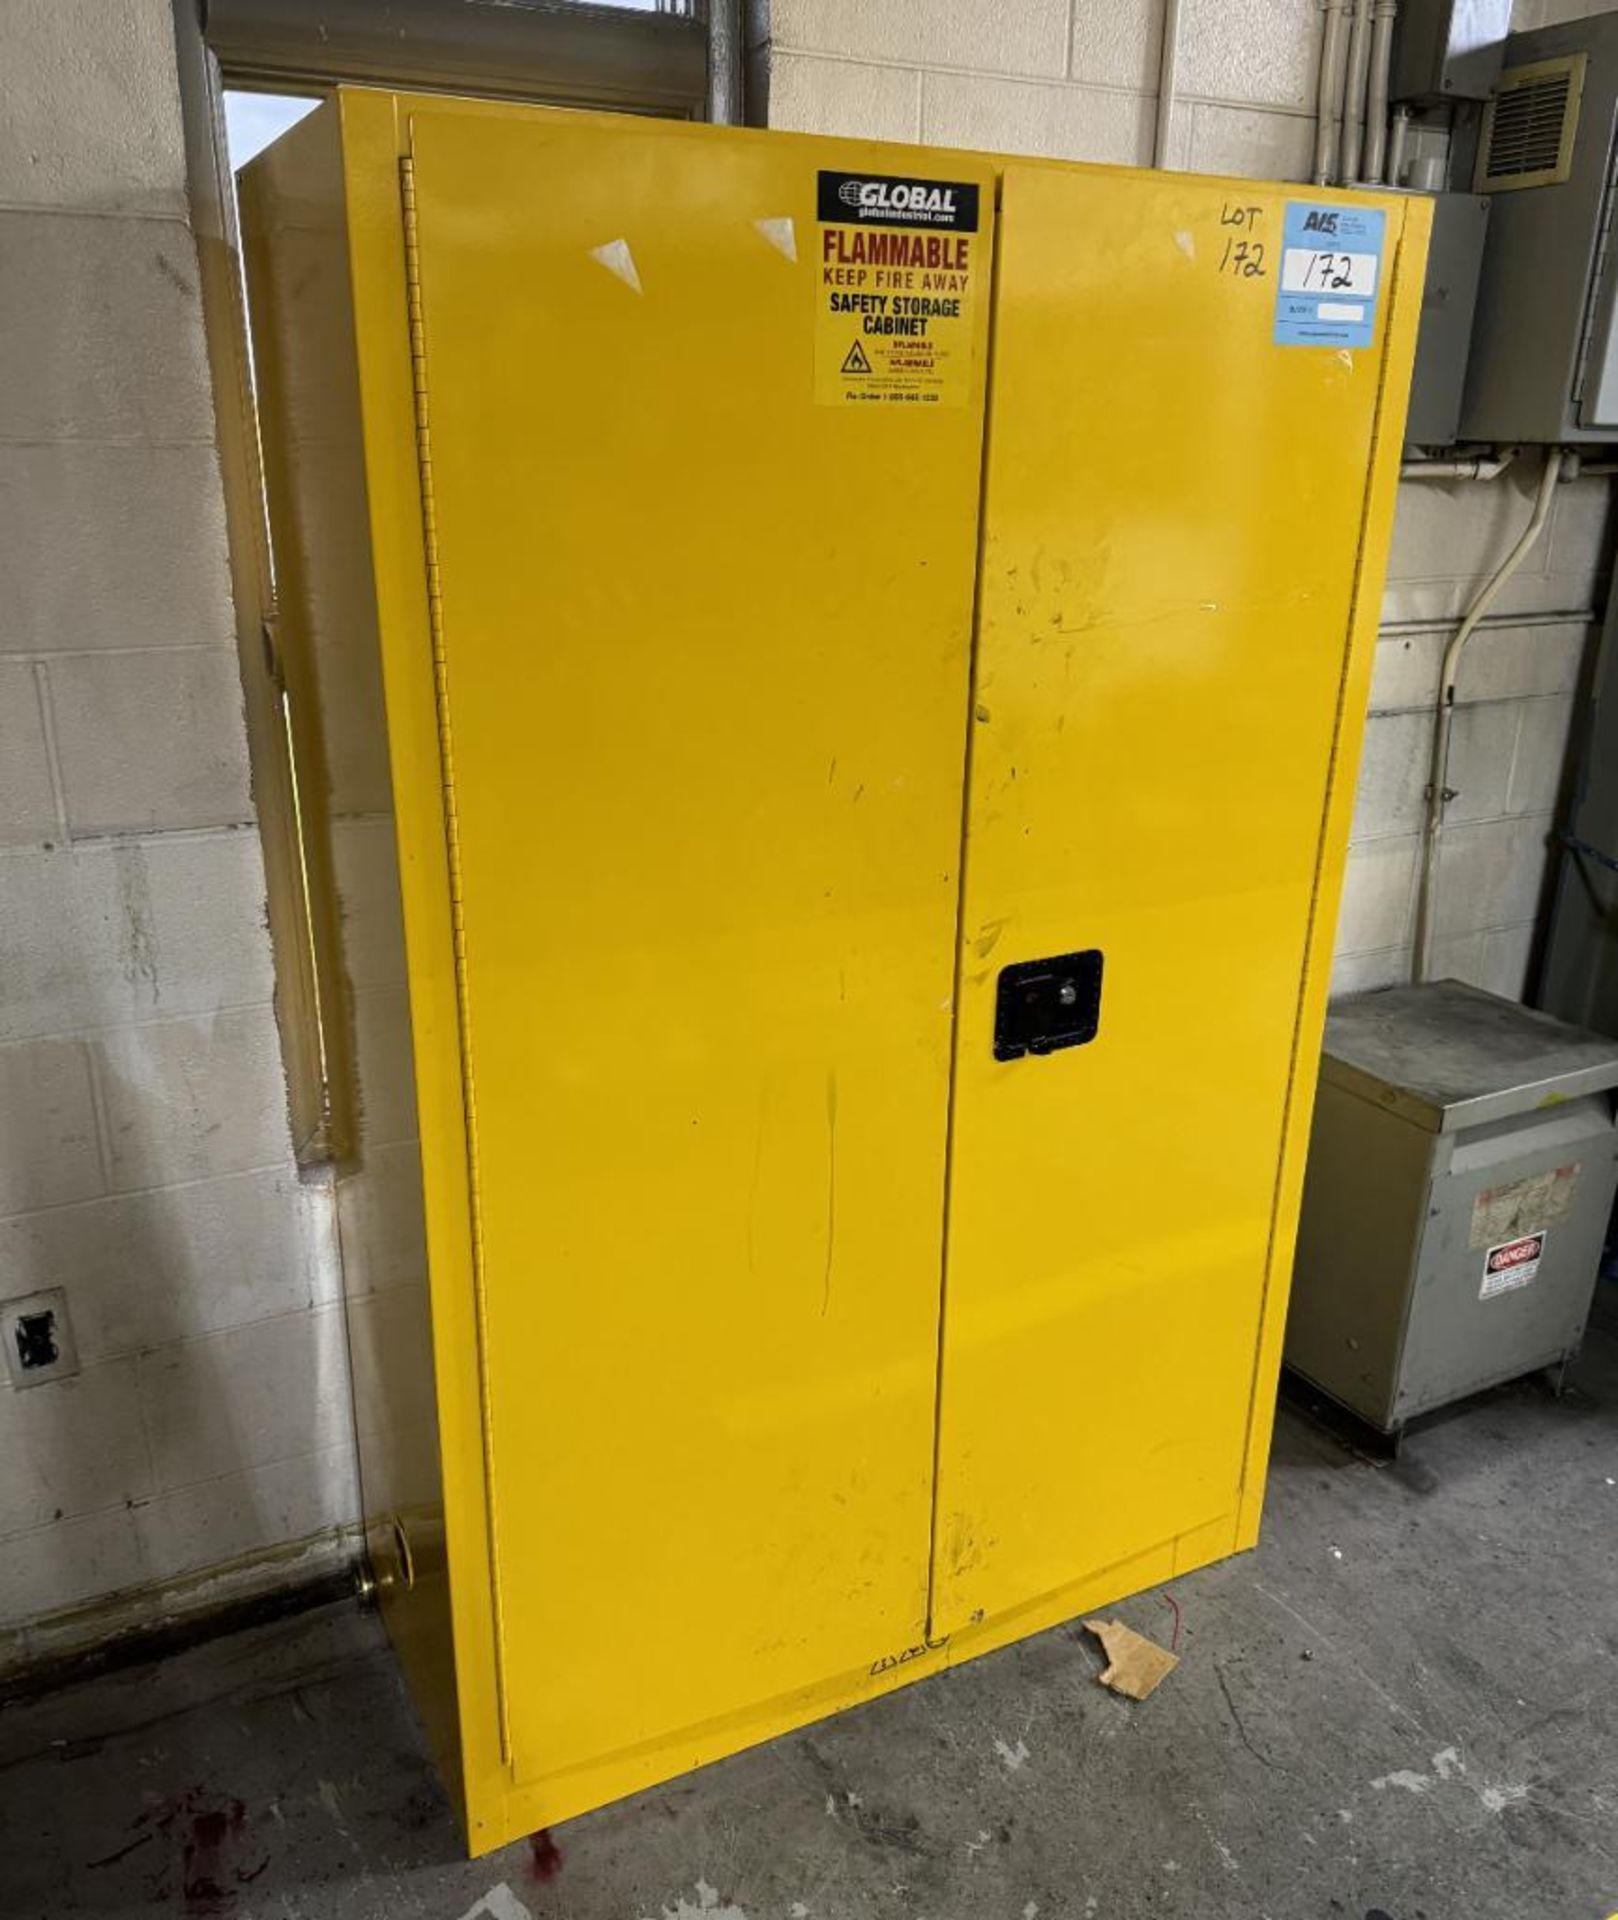 Global Industrial 45 Gallon Capacity Flammable Storage Cabinet, Model 298541. - Image 2 of 4